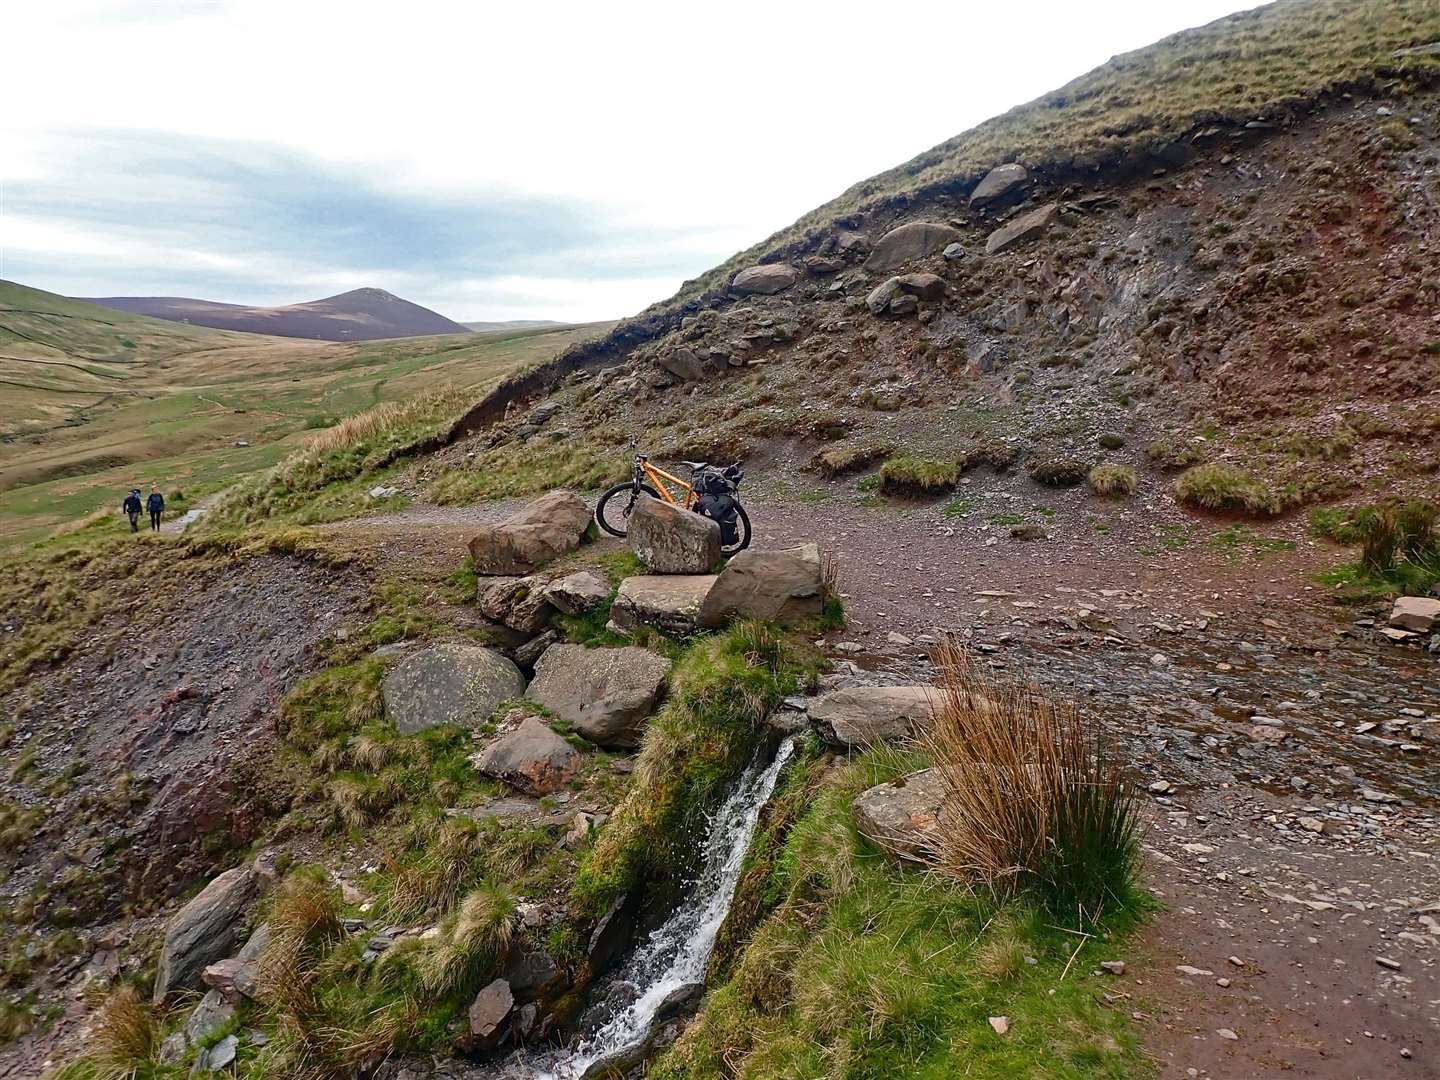 Exploring the ‘Back of Skiddaw’ route.